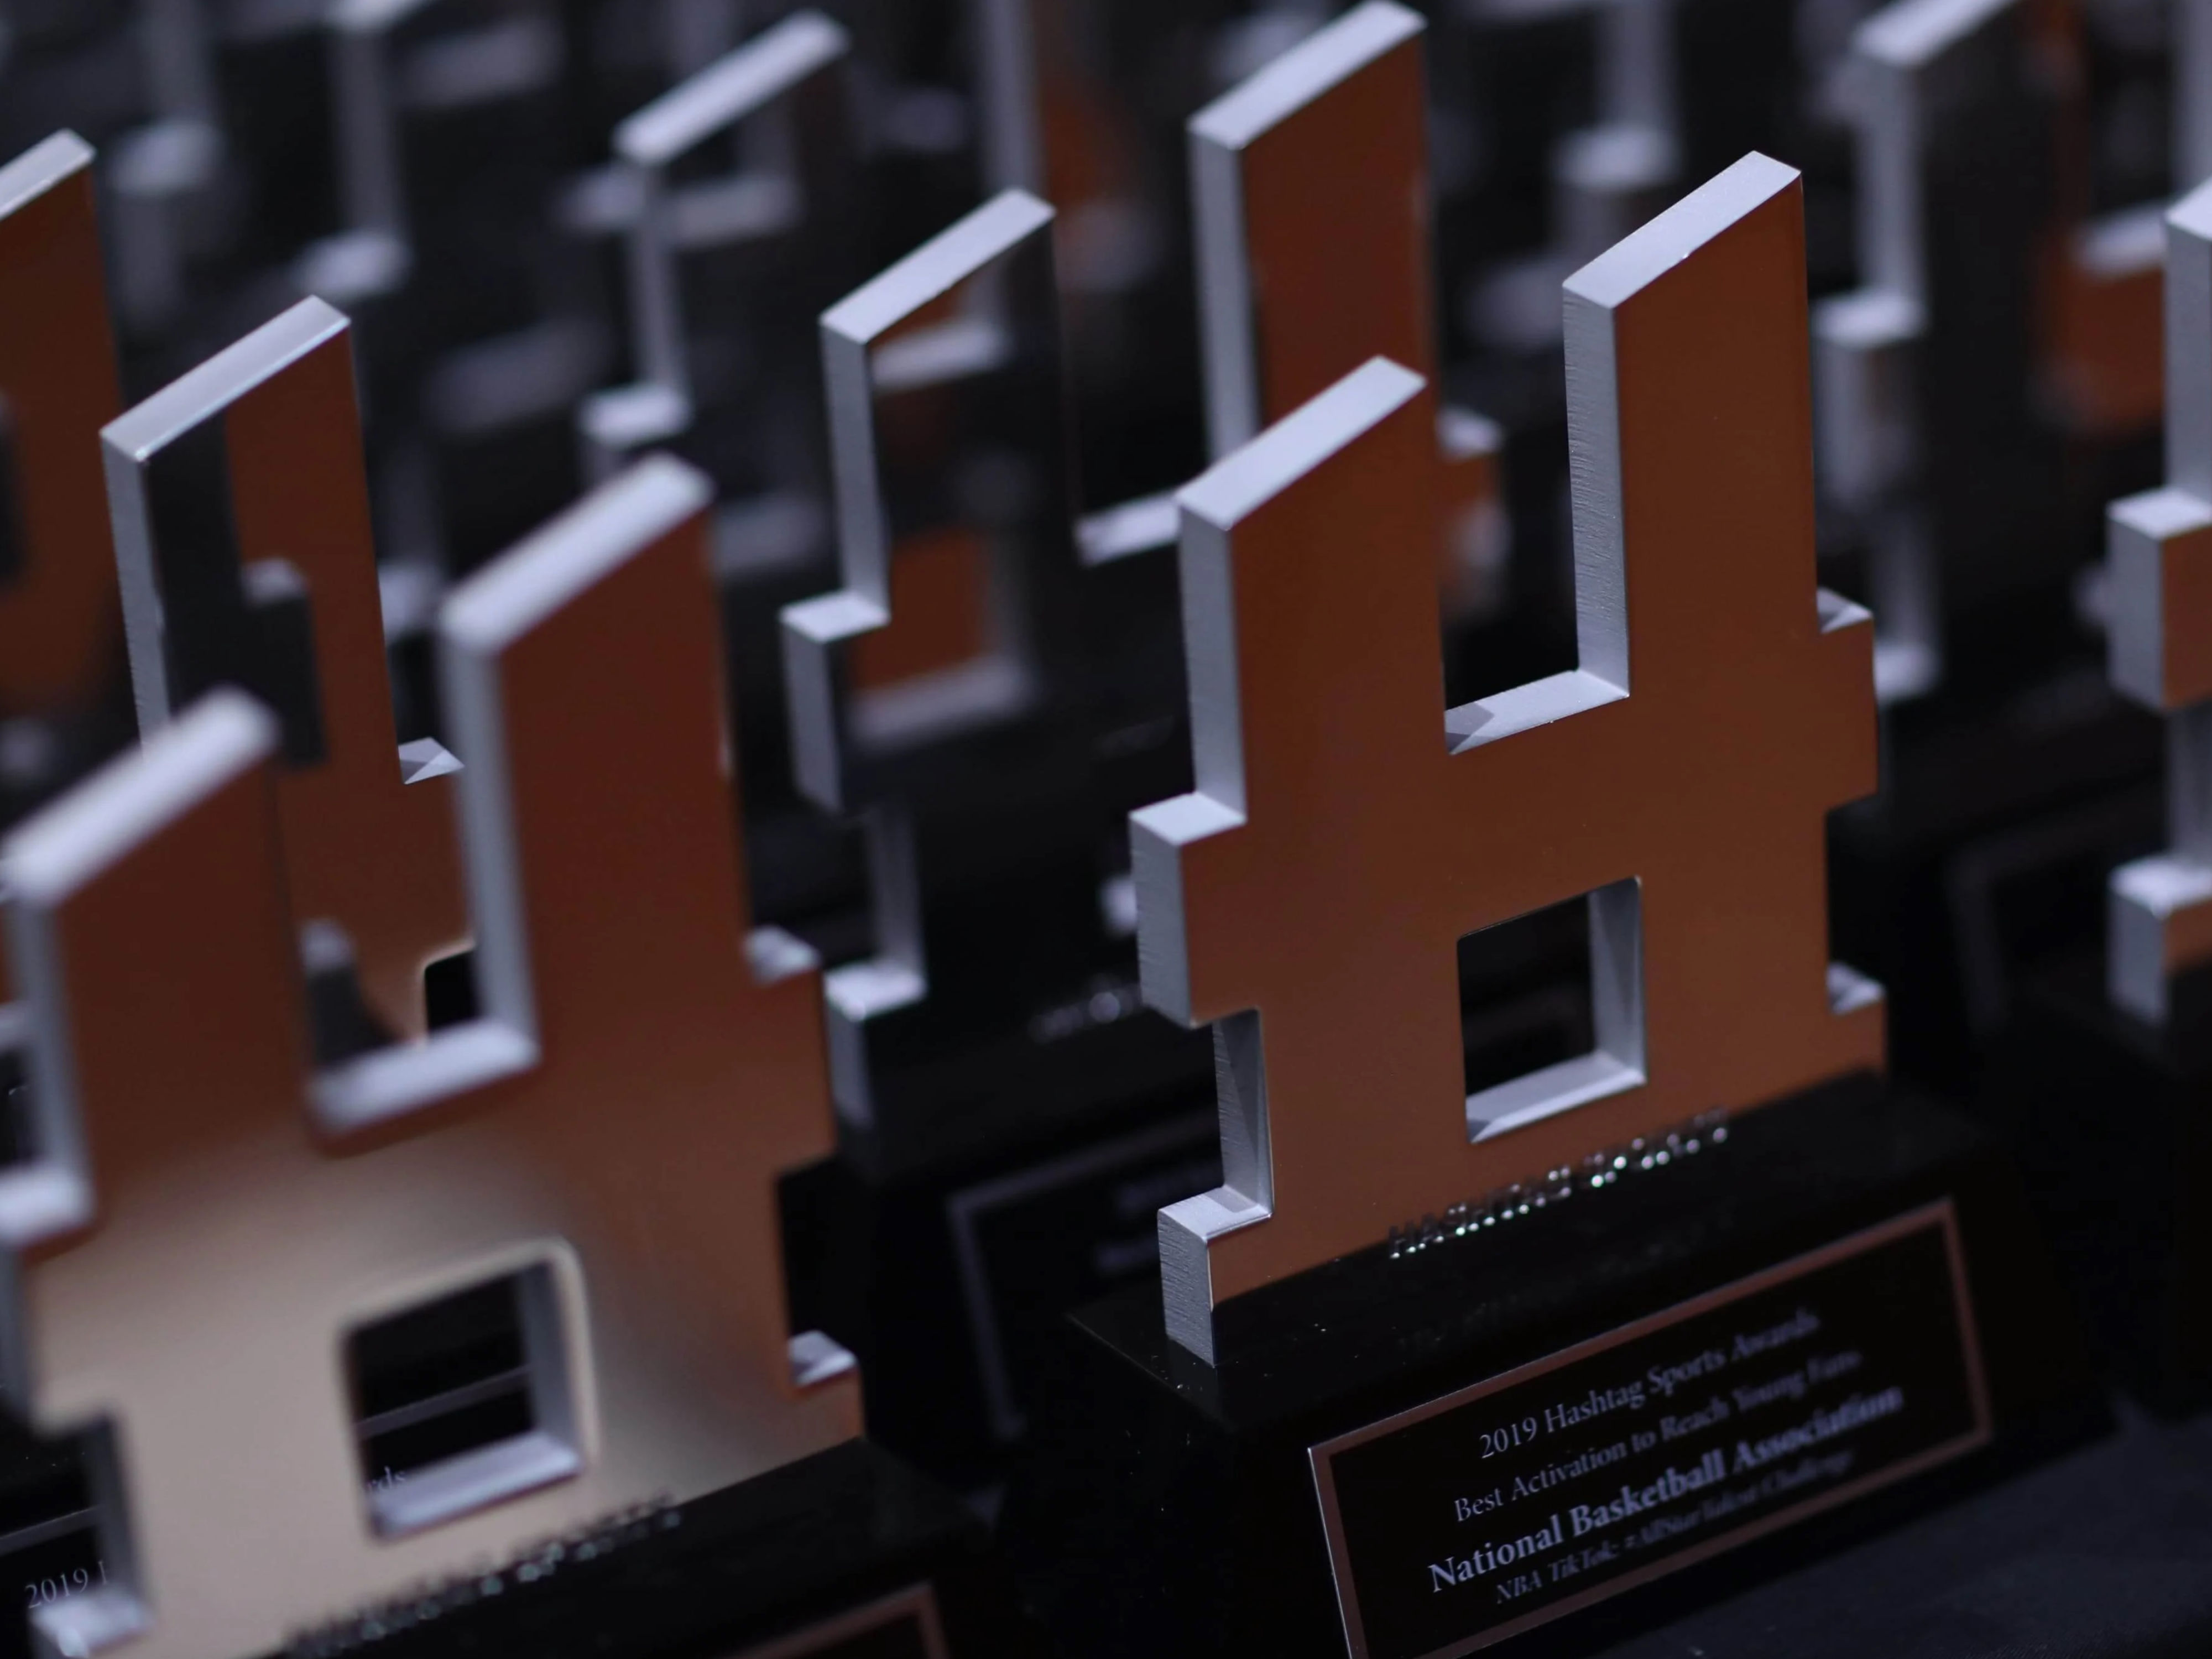 Close-up of trophies from the National Basketball Association's 2019 Hashtag Awards.